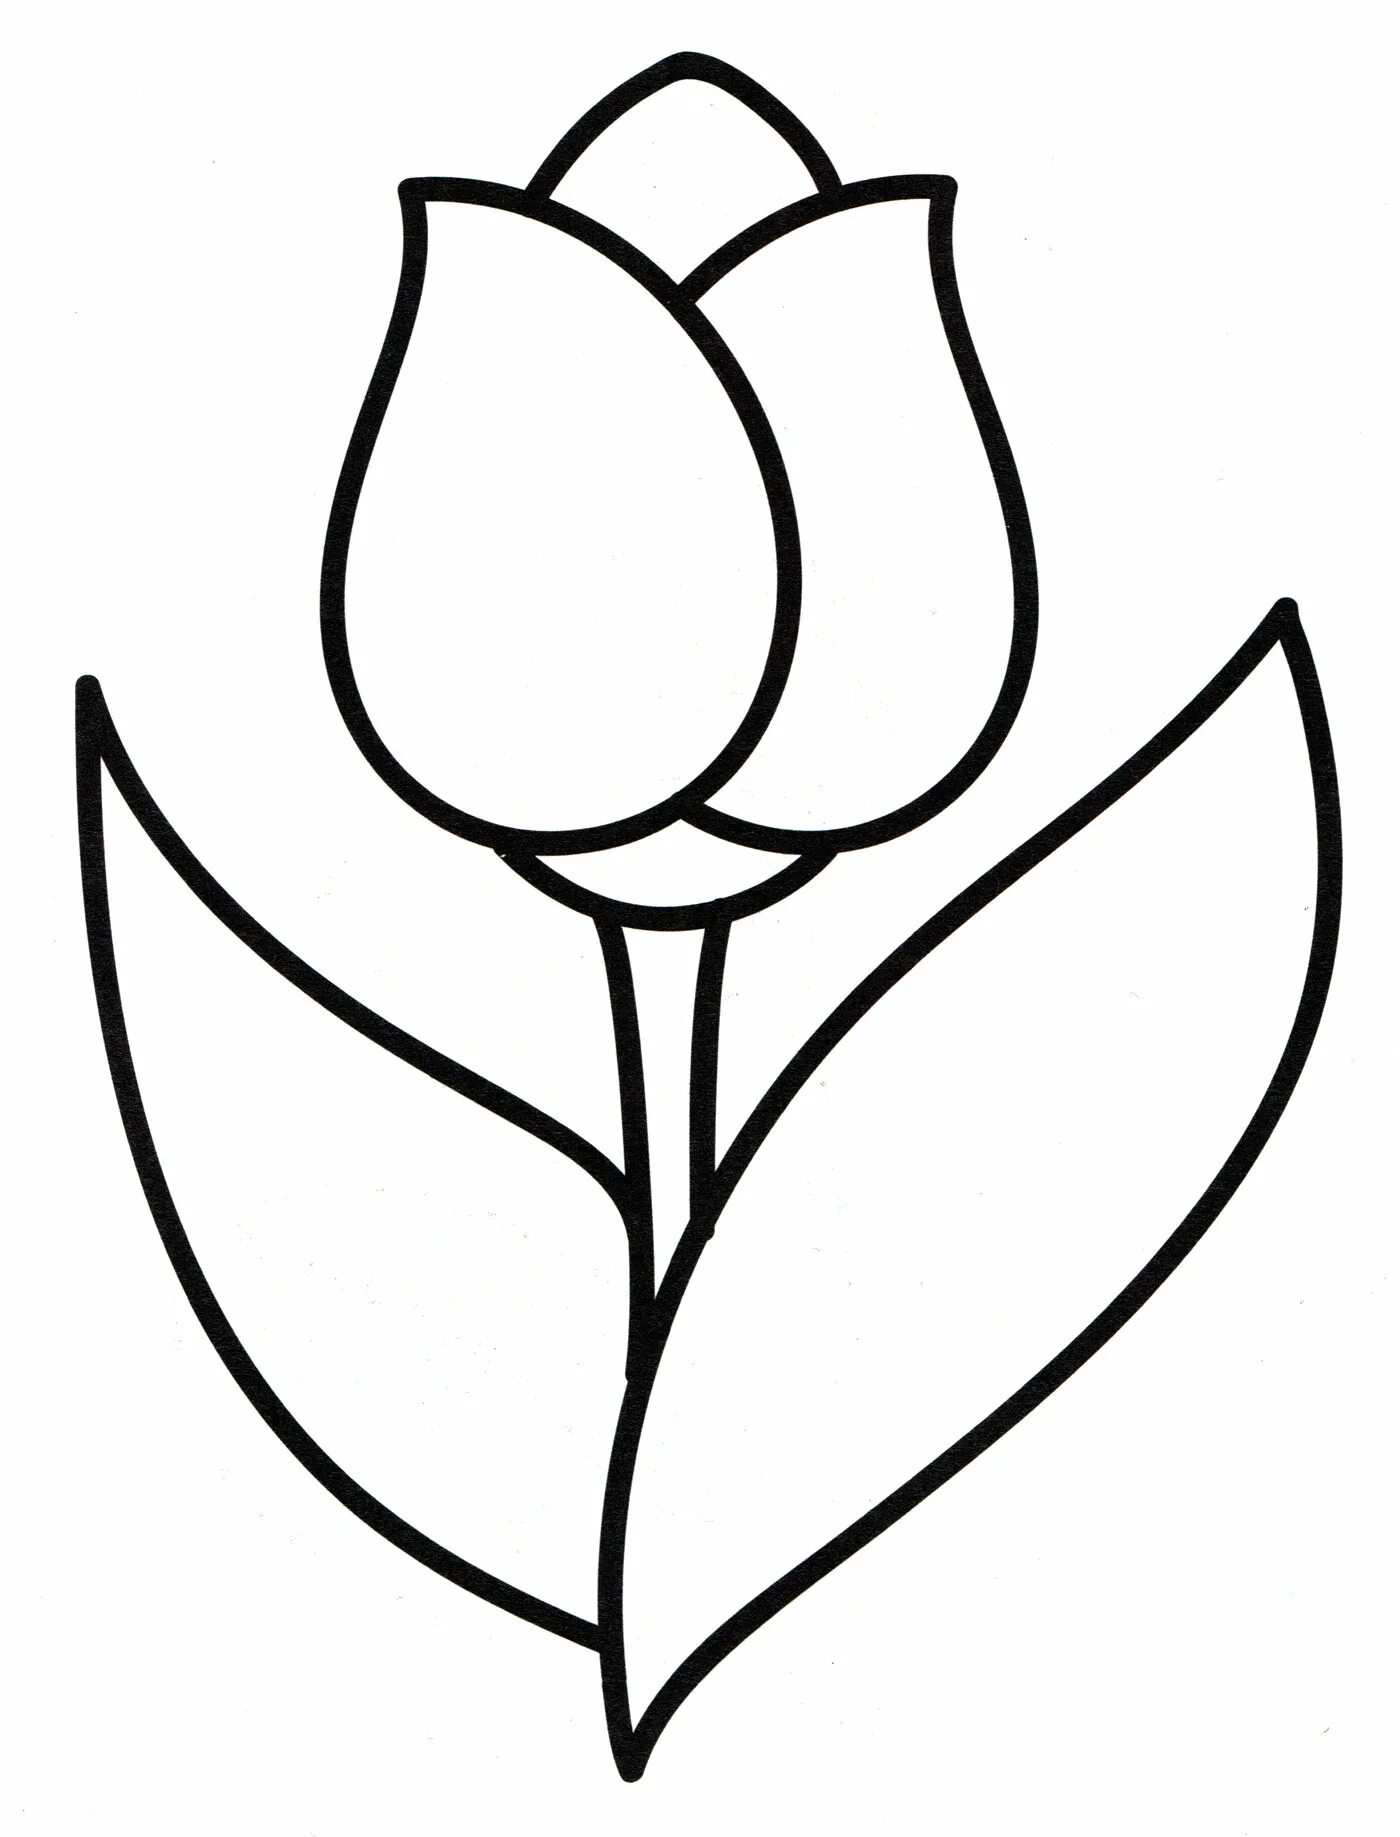 Adorable tulip coloring book for 5-6 year olds